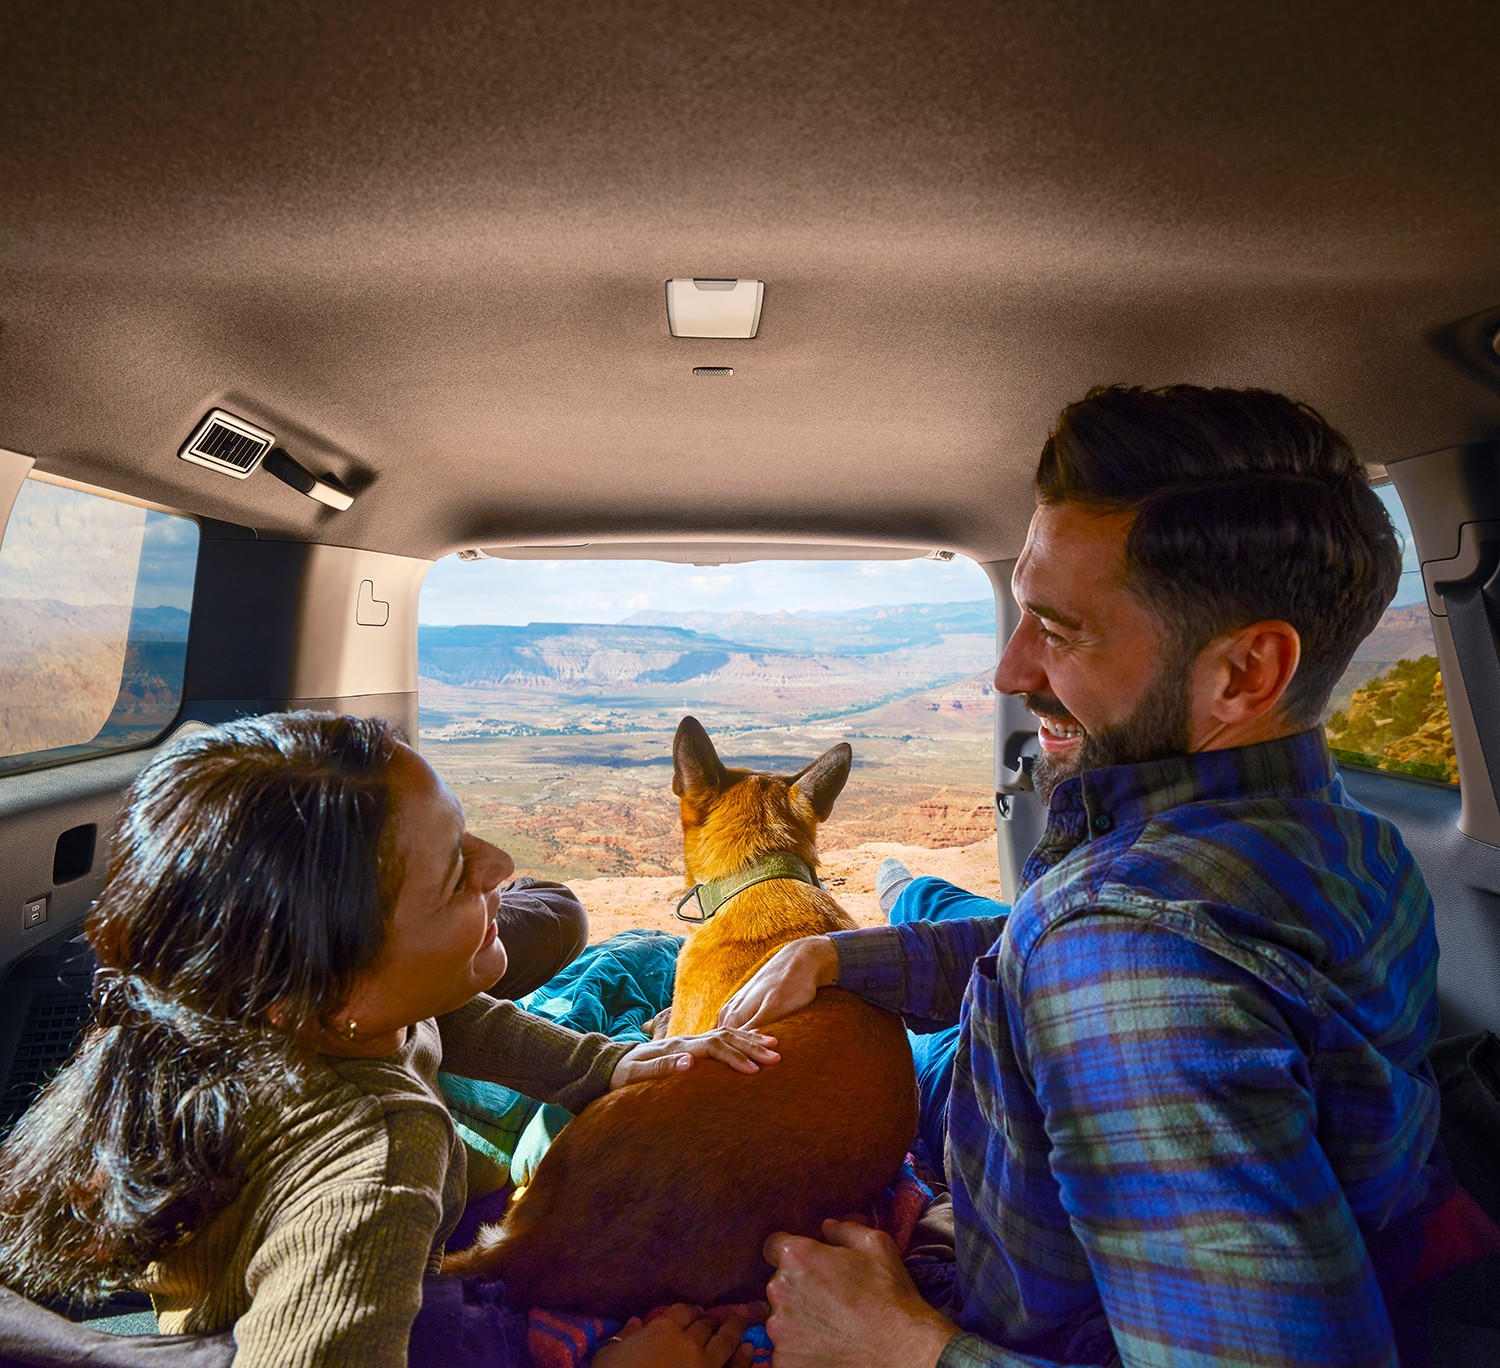 A couple lounge in the back of their Toyota truck laughing with each other while their dog looks out through the open tailgate at a scenic landscape.